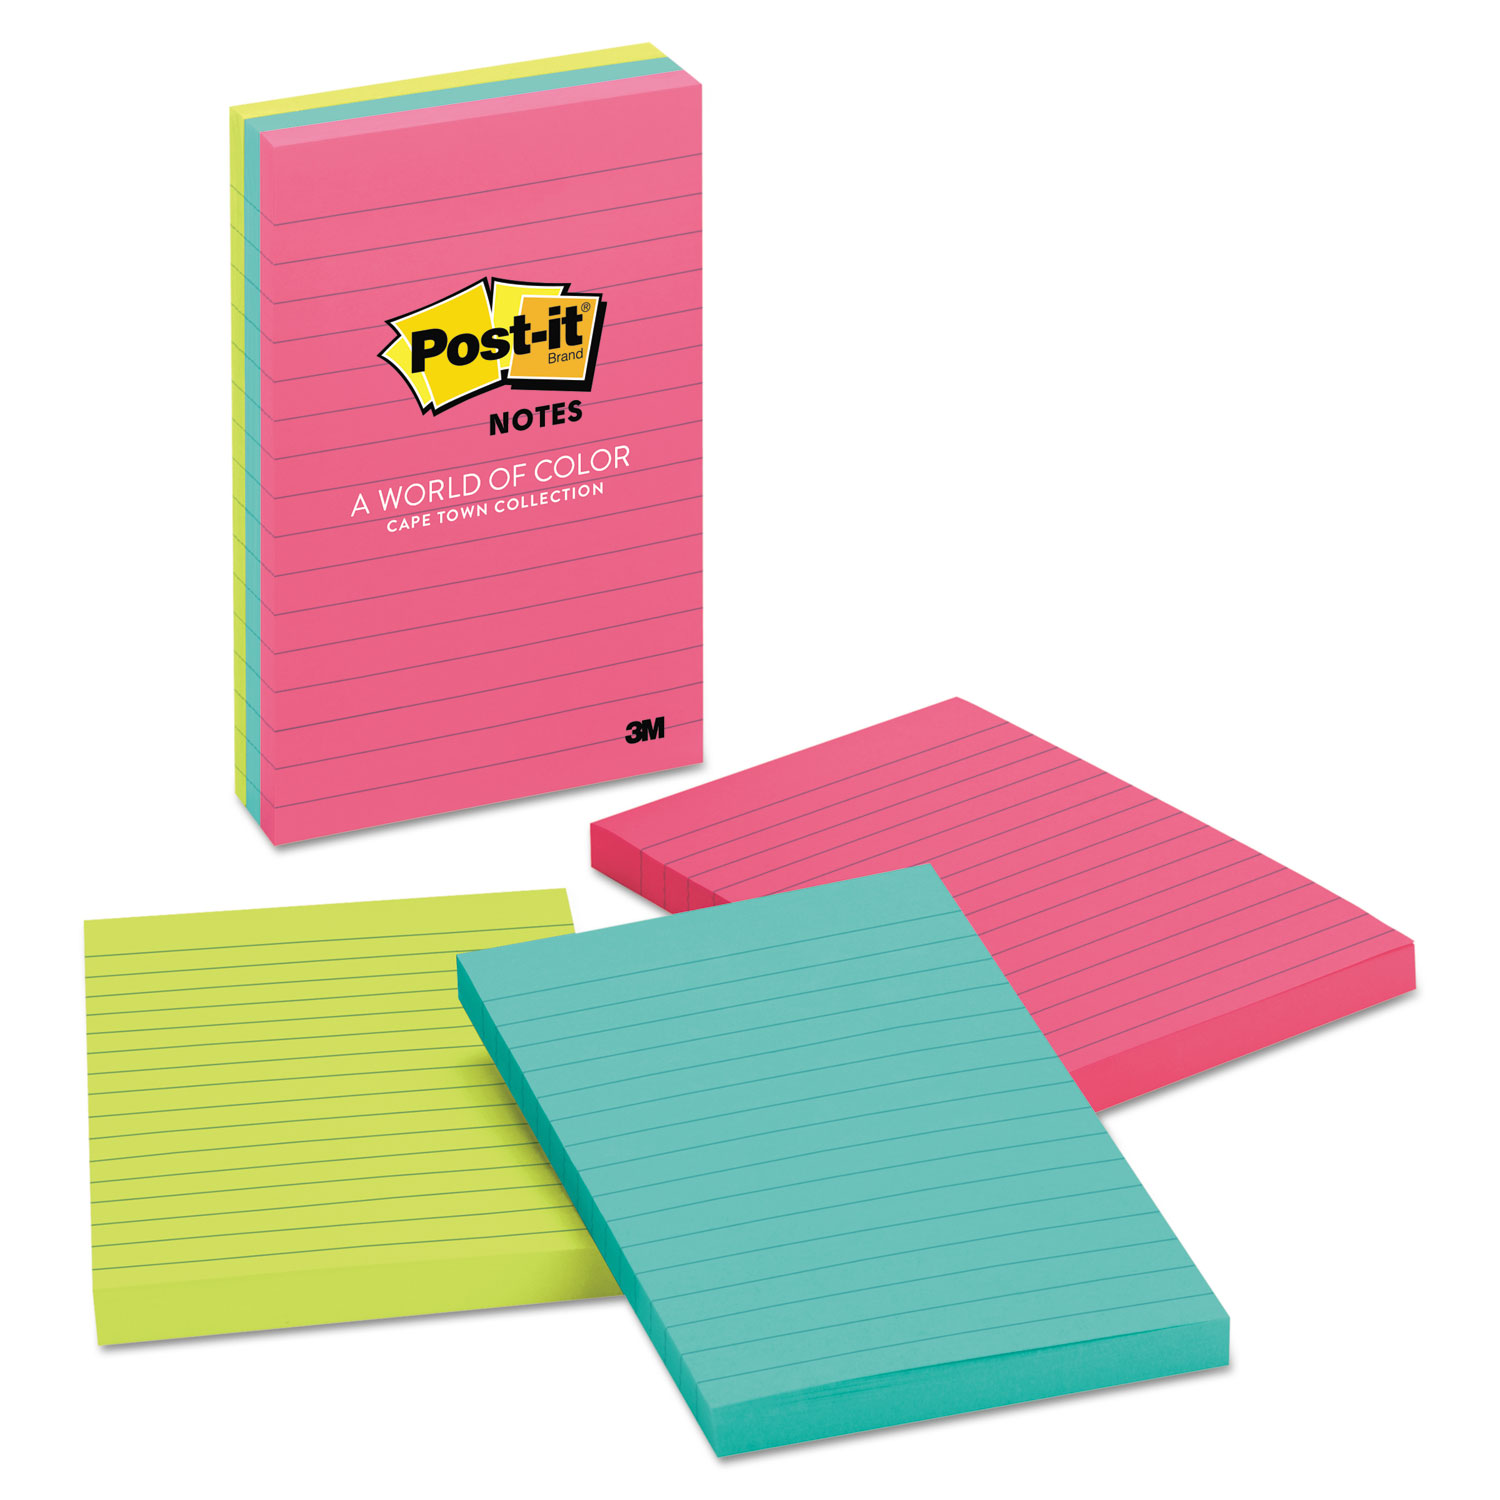  Post-it Notes 660-3AN Original Pads in Cape Town Colors, Lined, 4 x 6, 100-Sheet, 3/Pack (MMM6603AN) 